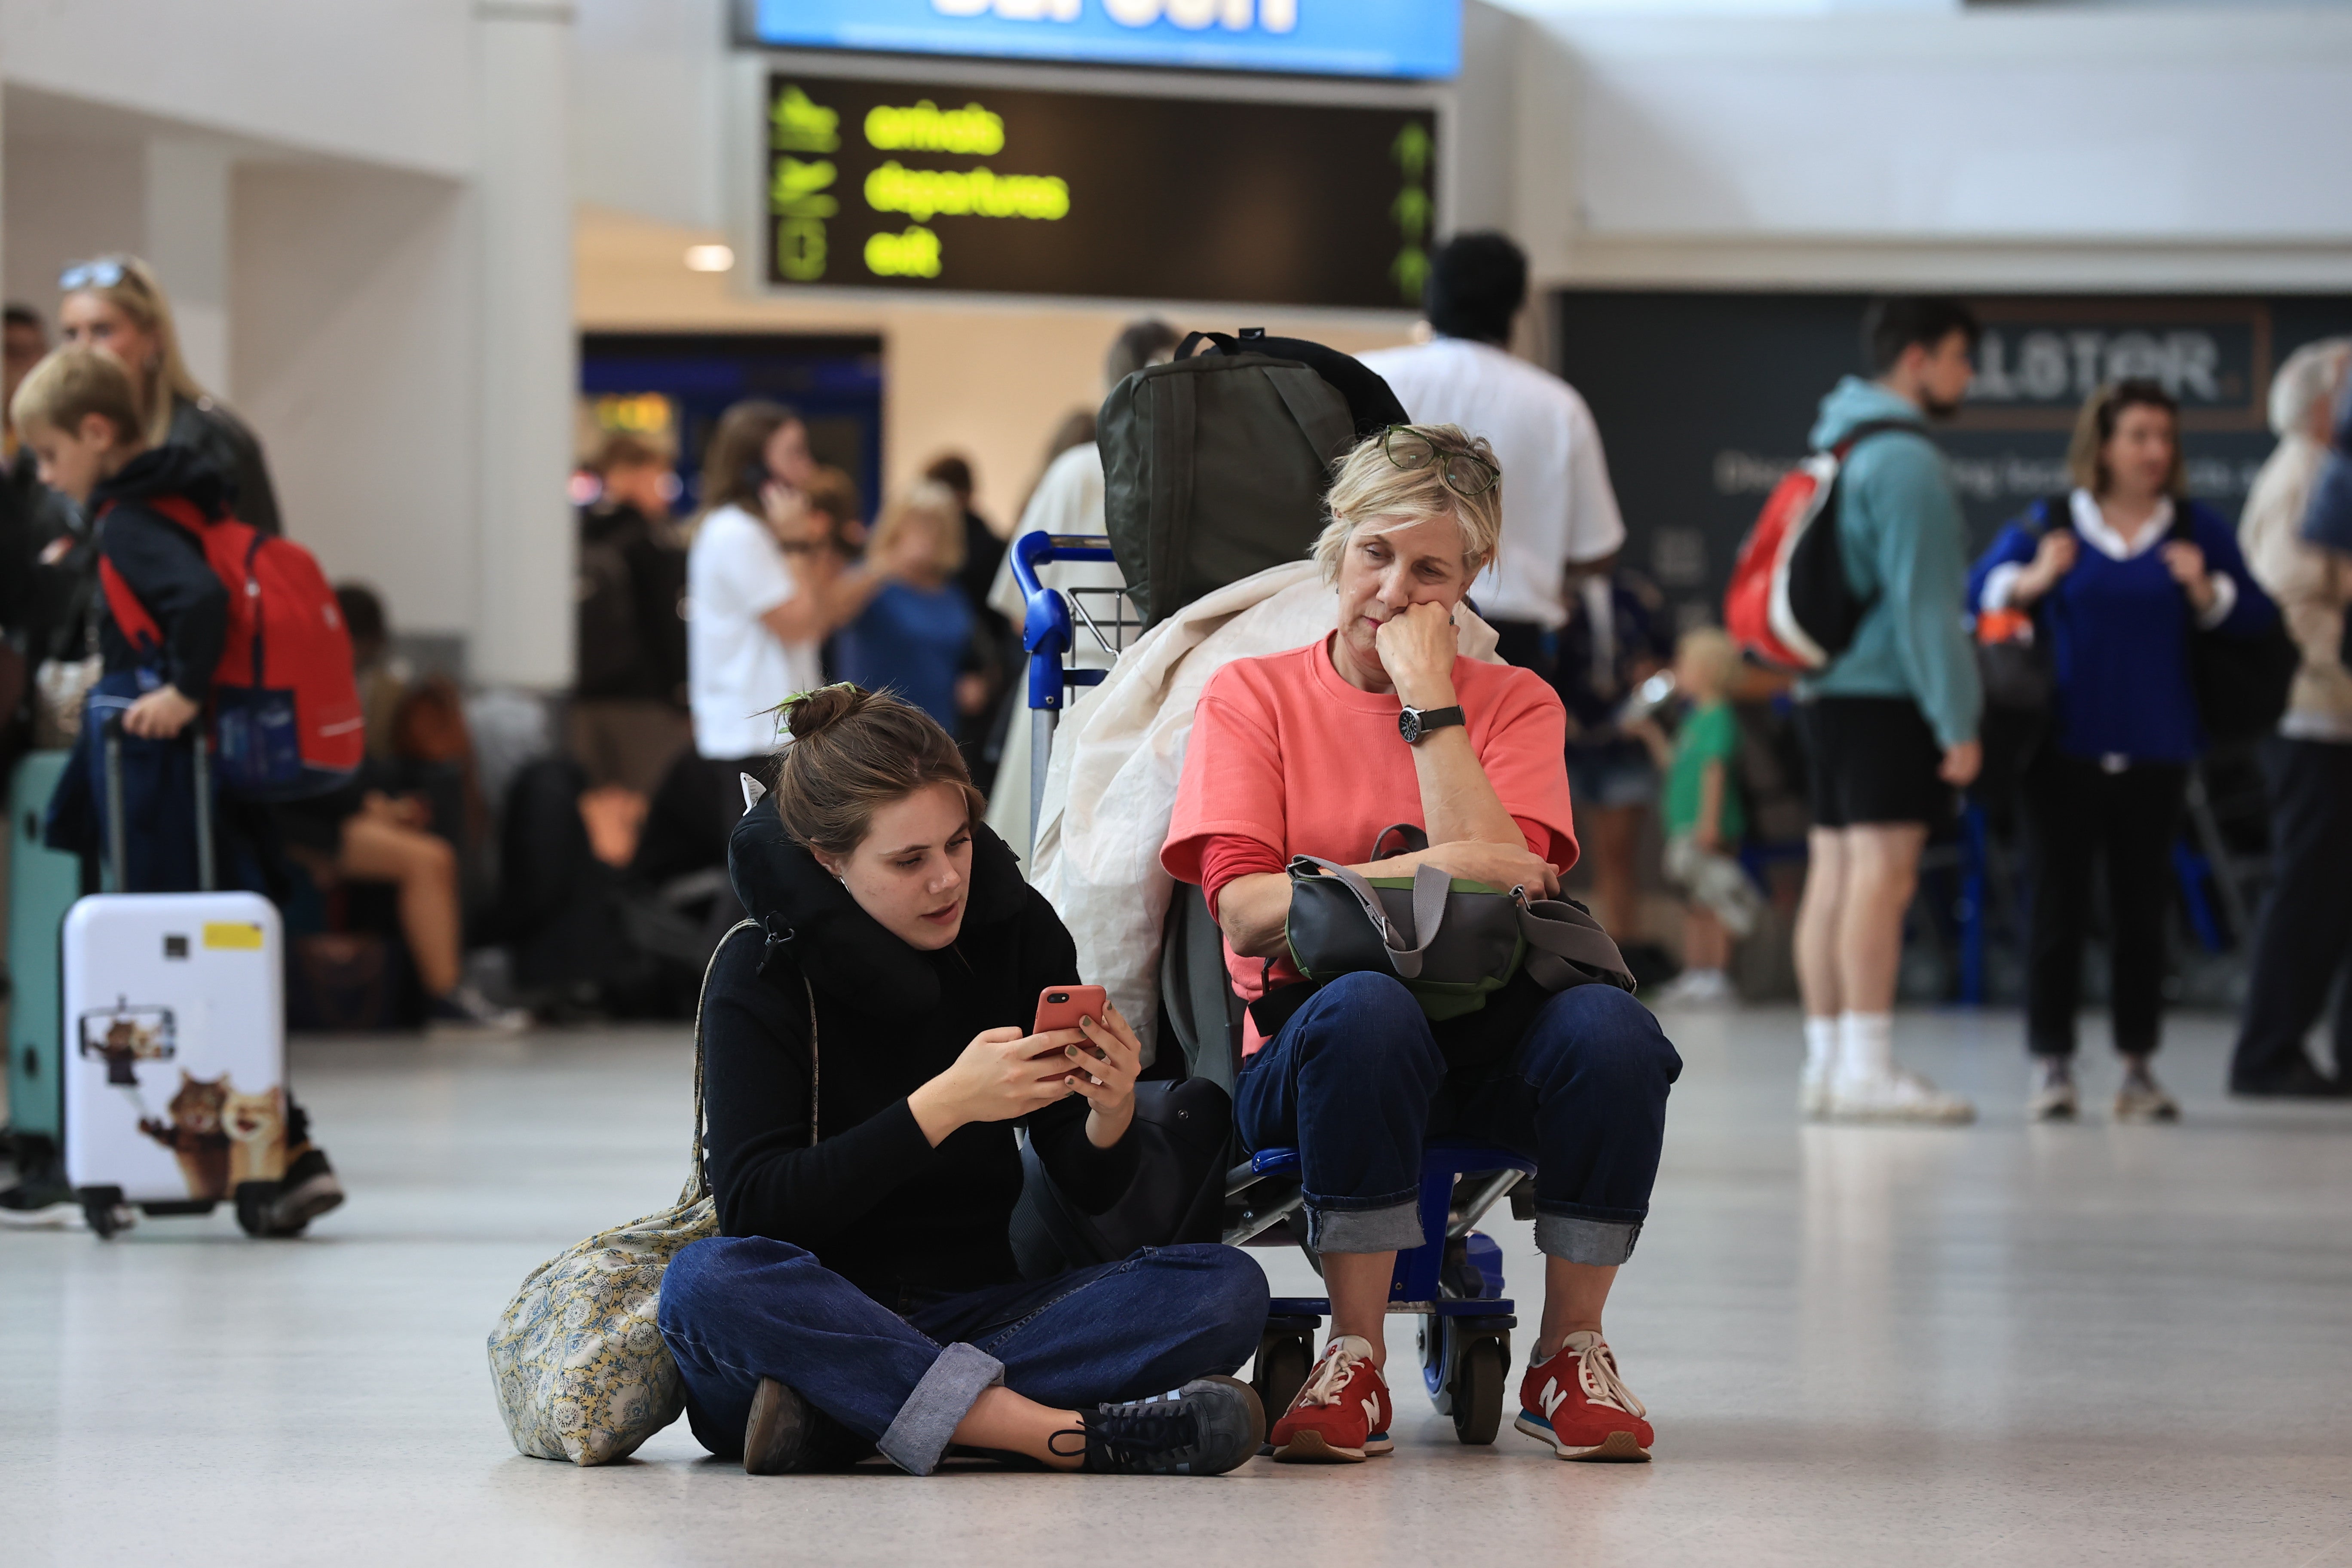 Passengers at Belfast International Airport, as flights to the UK and Ireland were cancelled as a result of air traffic control issues in the UK